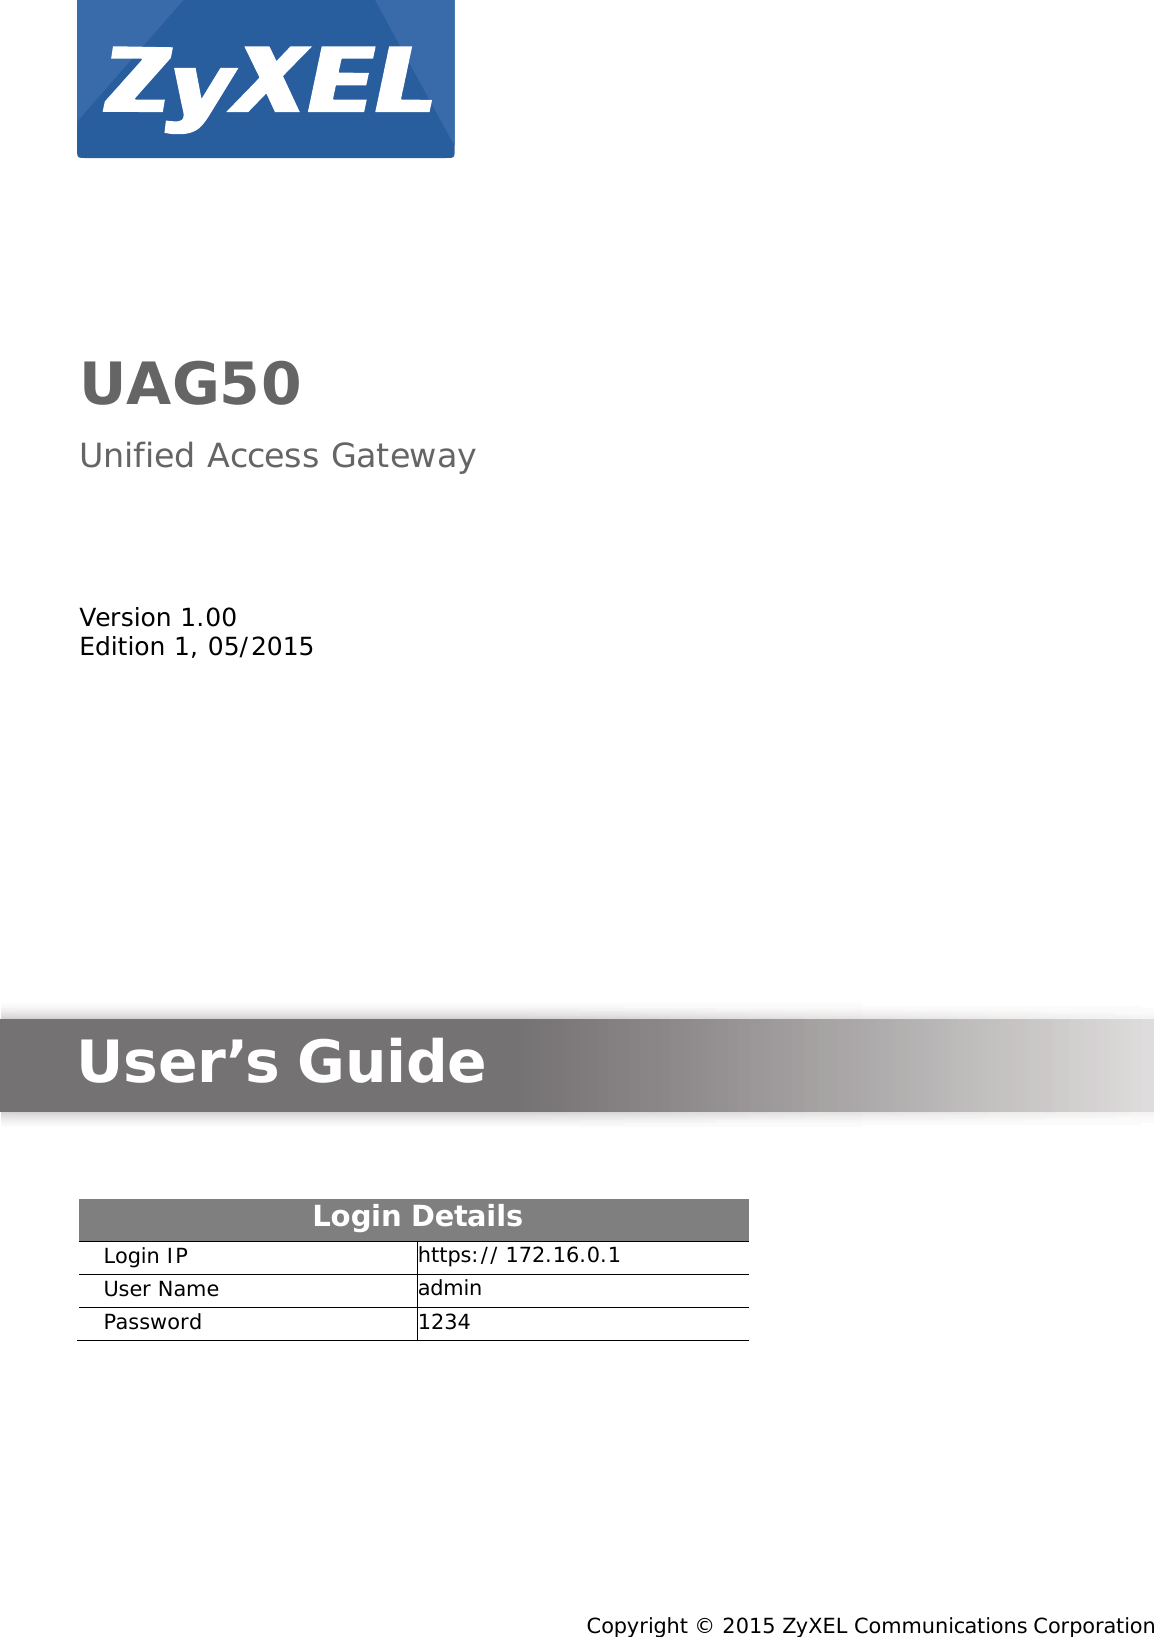                UAG50  Unified Access Gateway       Version 1.00 Edition 1, 05/2015                   User’s Guide      Login Details Login IP https:// 172.16.0.1 User Name admin Password 1234              Copyright © 2015 ZyXEL Communications Corporation 